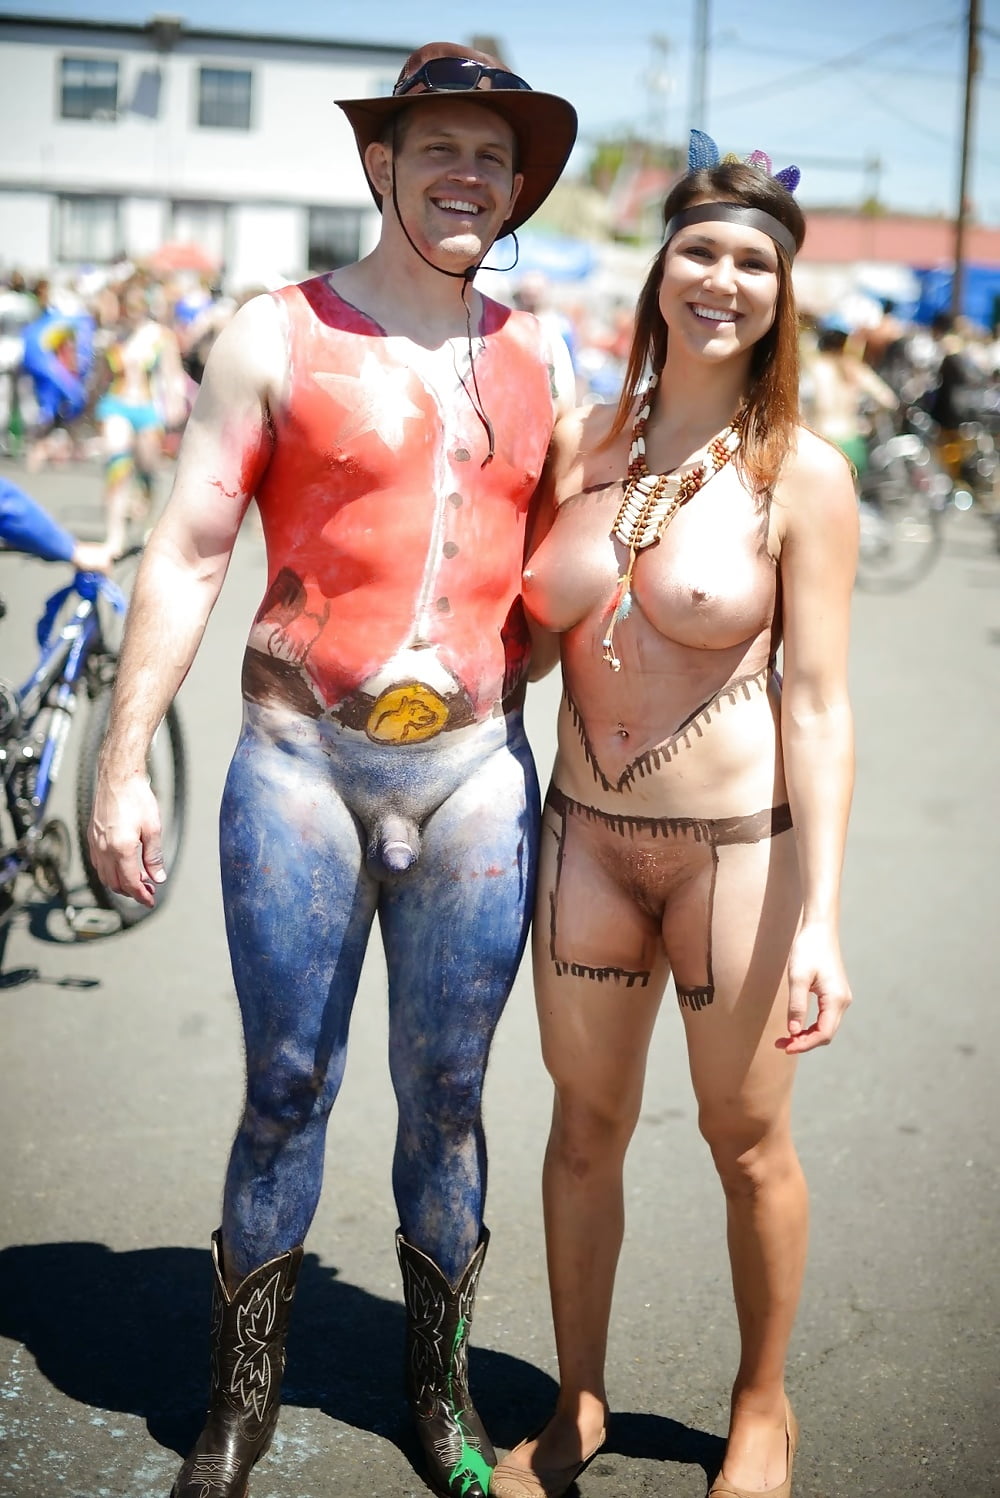 Teen Girl Participated Nude At Fremont Solstice Race nude pic, sex photos T...